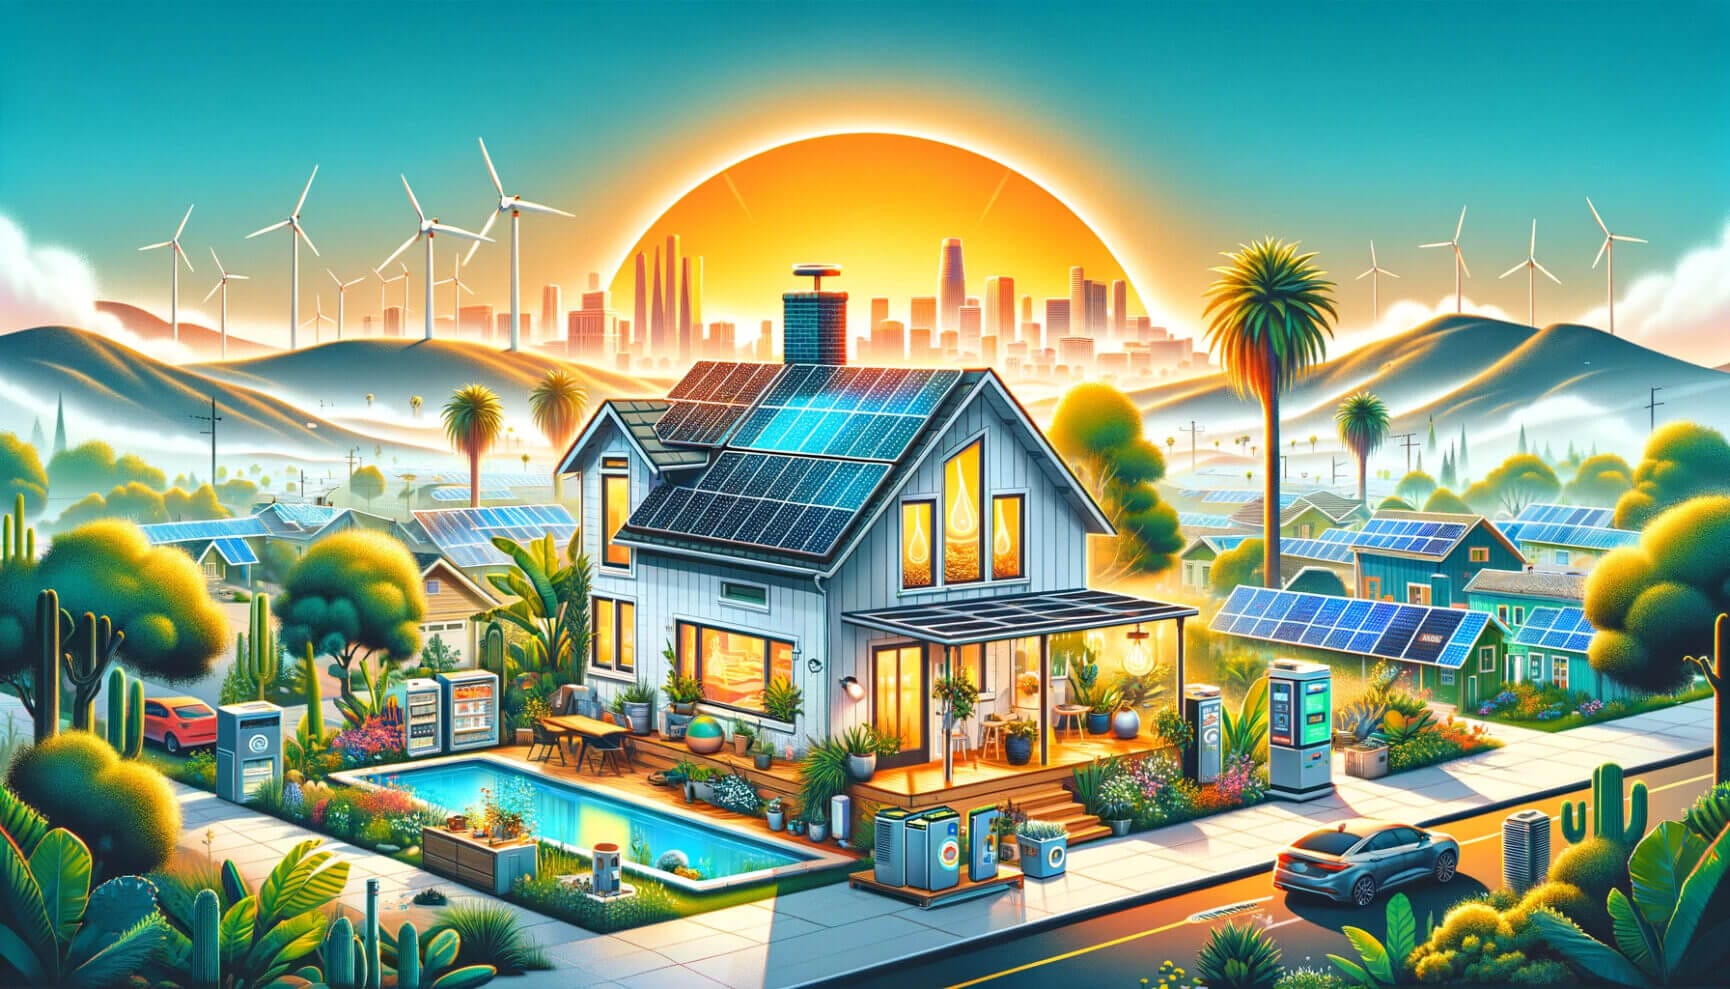 An illustration of a house with solar panels and wind turbines.